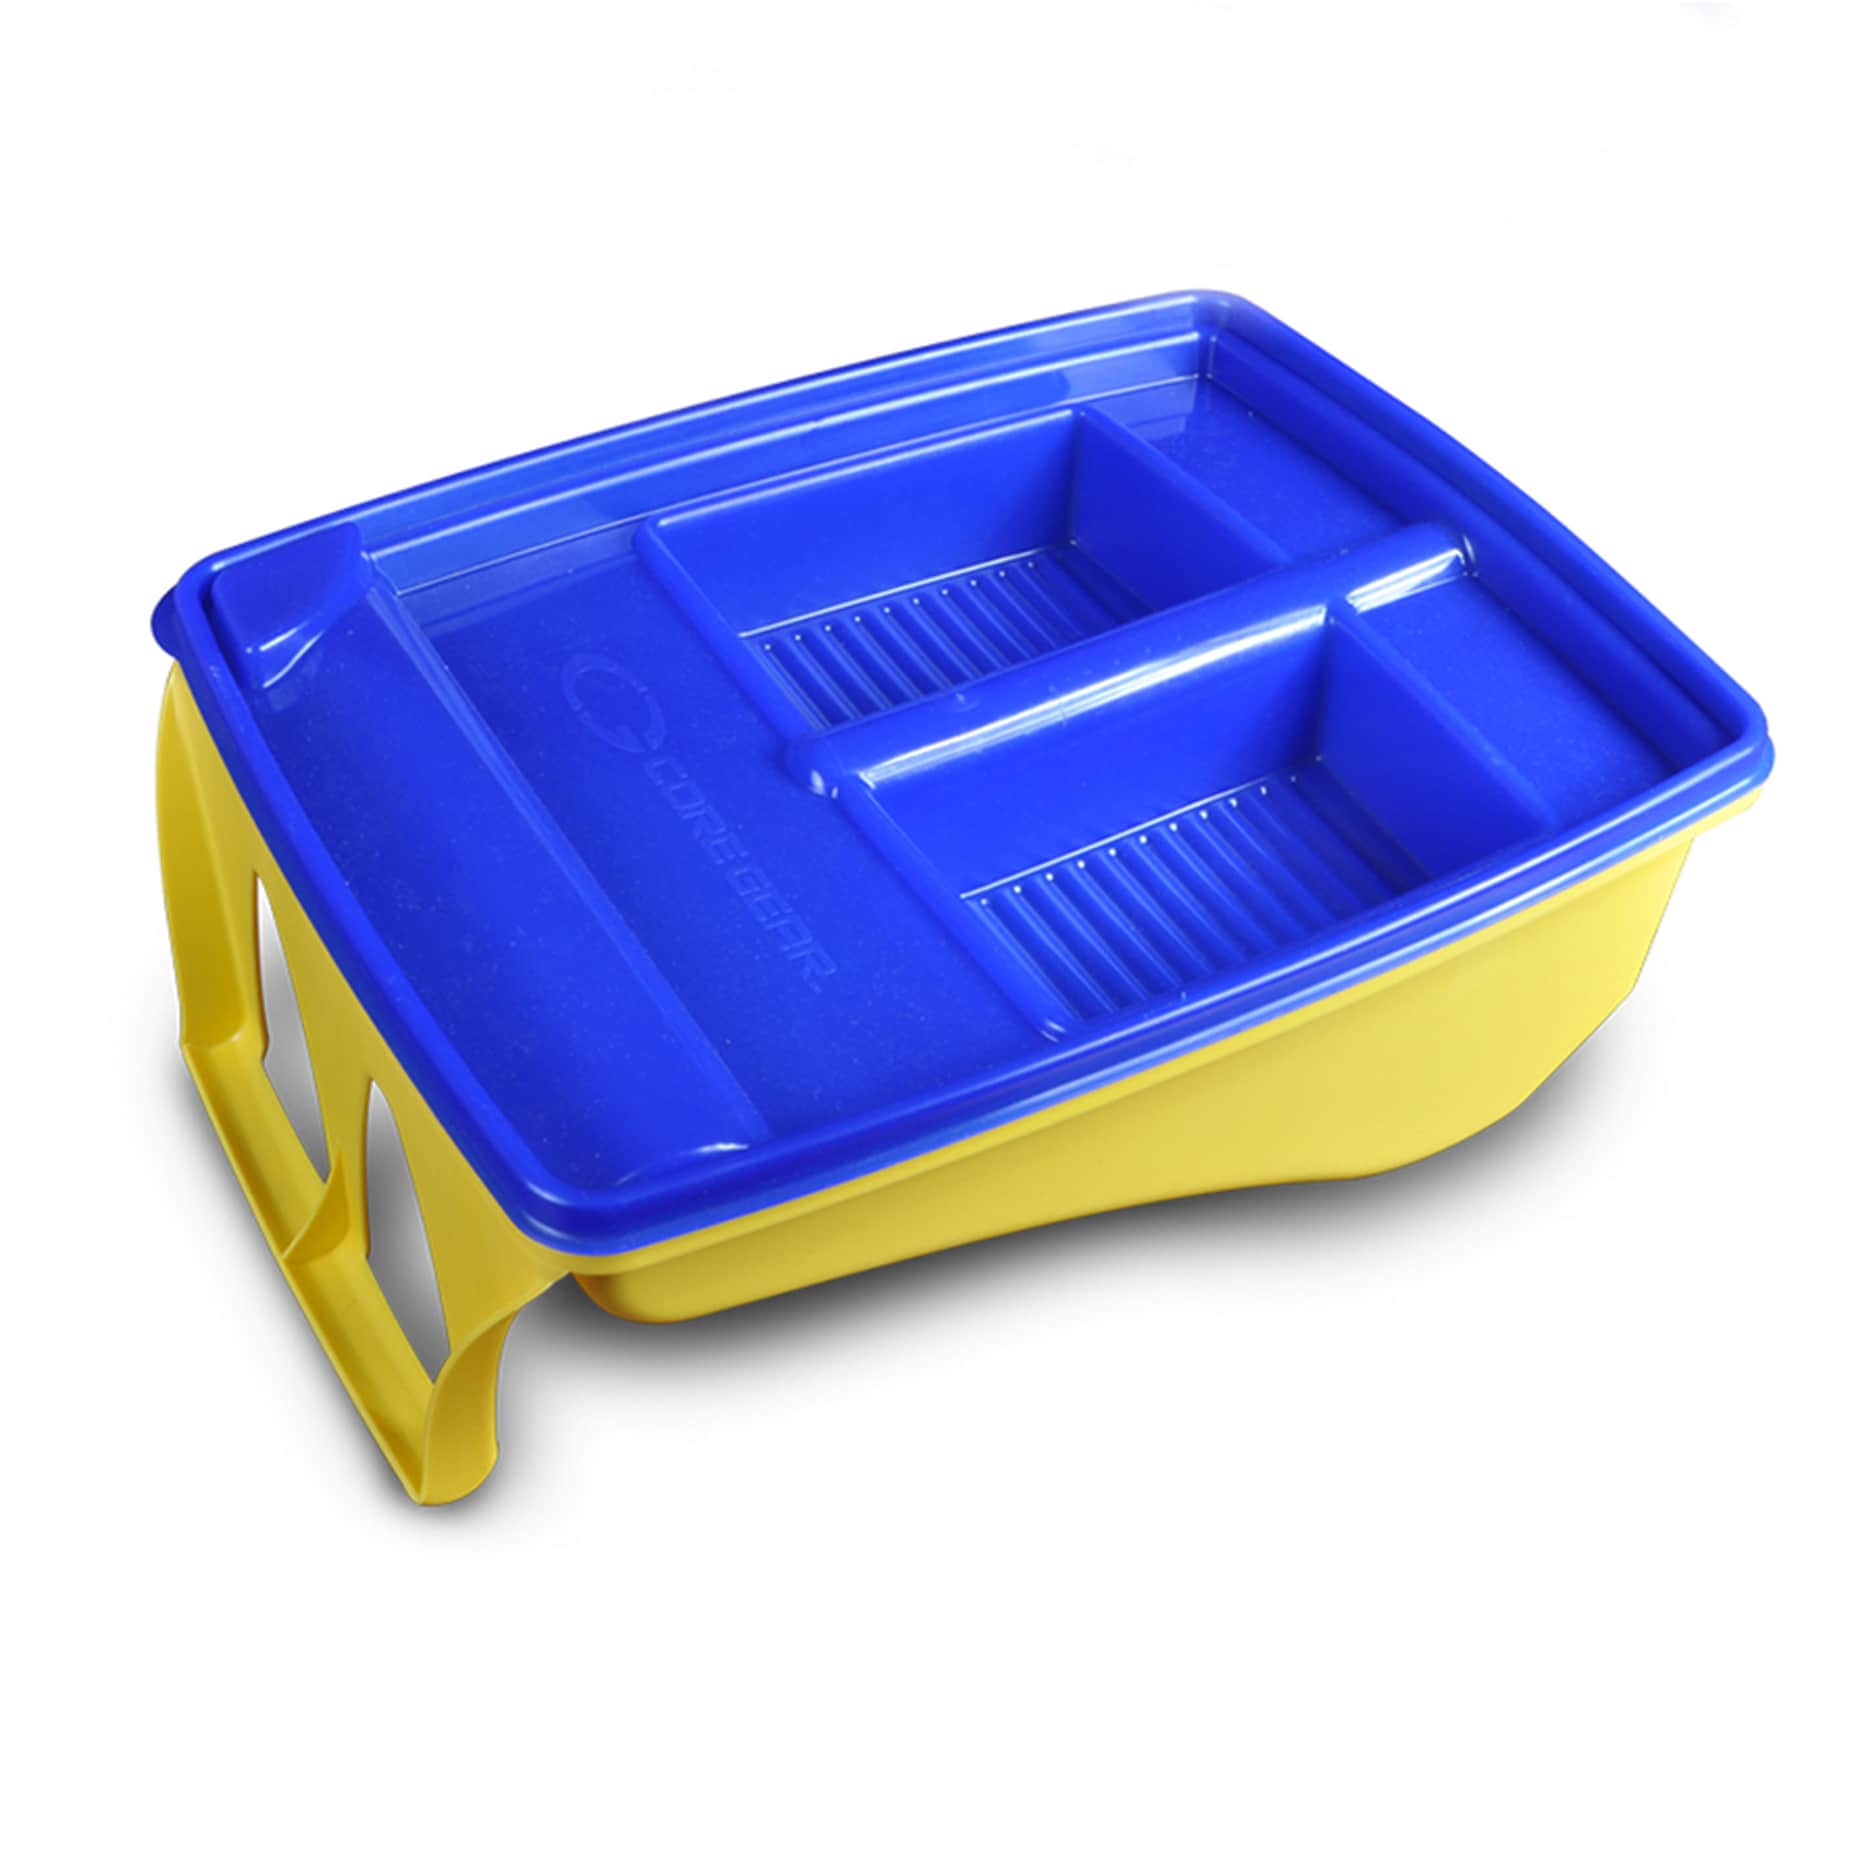 Deluxe Plastic Paint Tray, Tray With Ladder Hook Legs